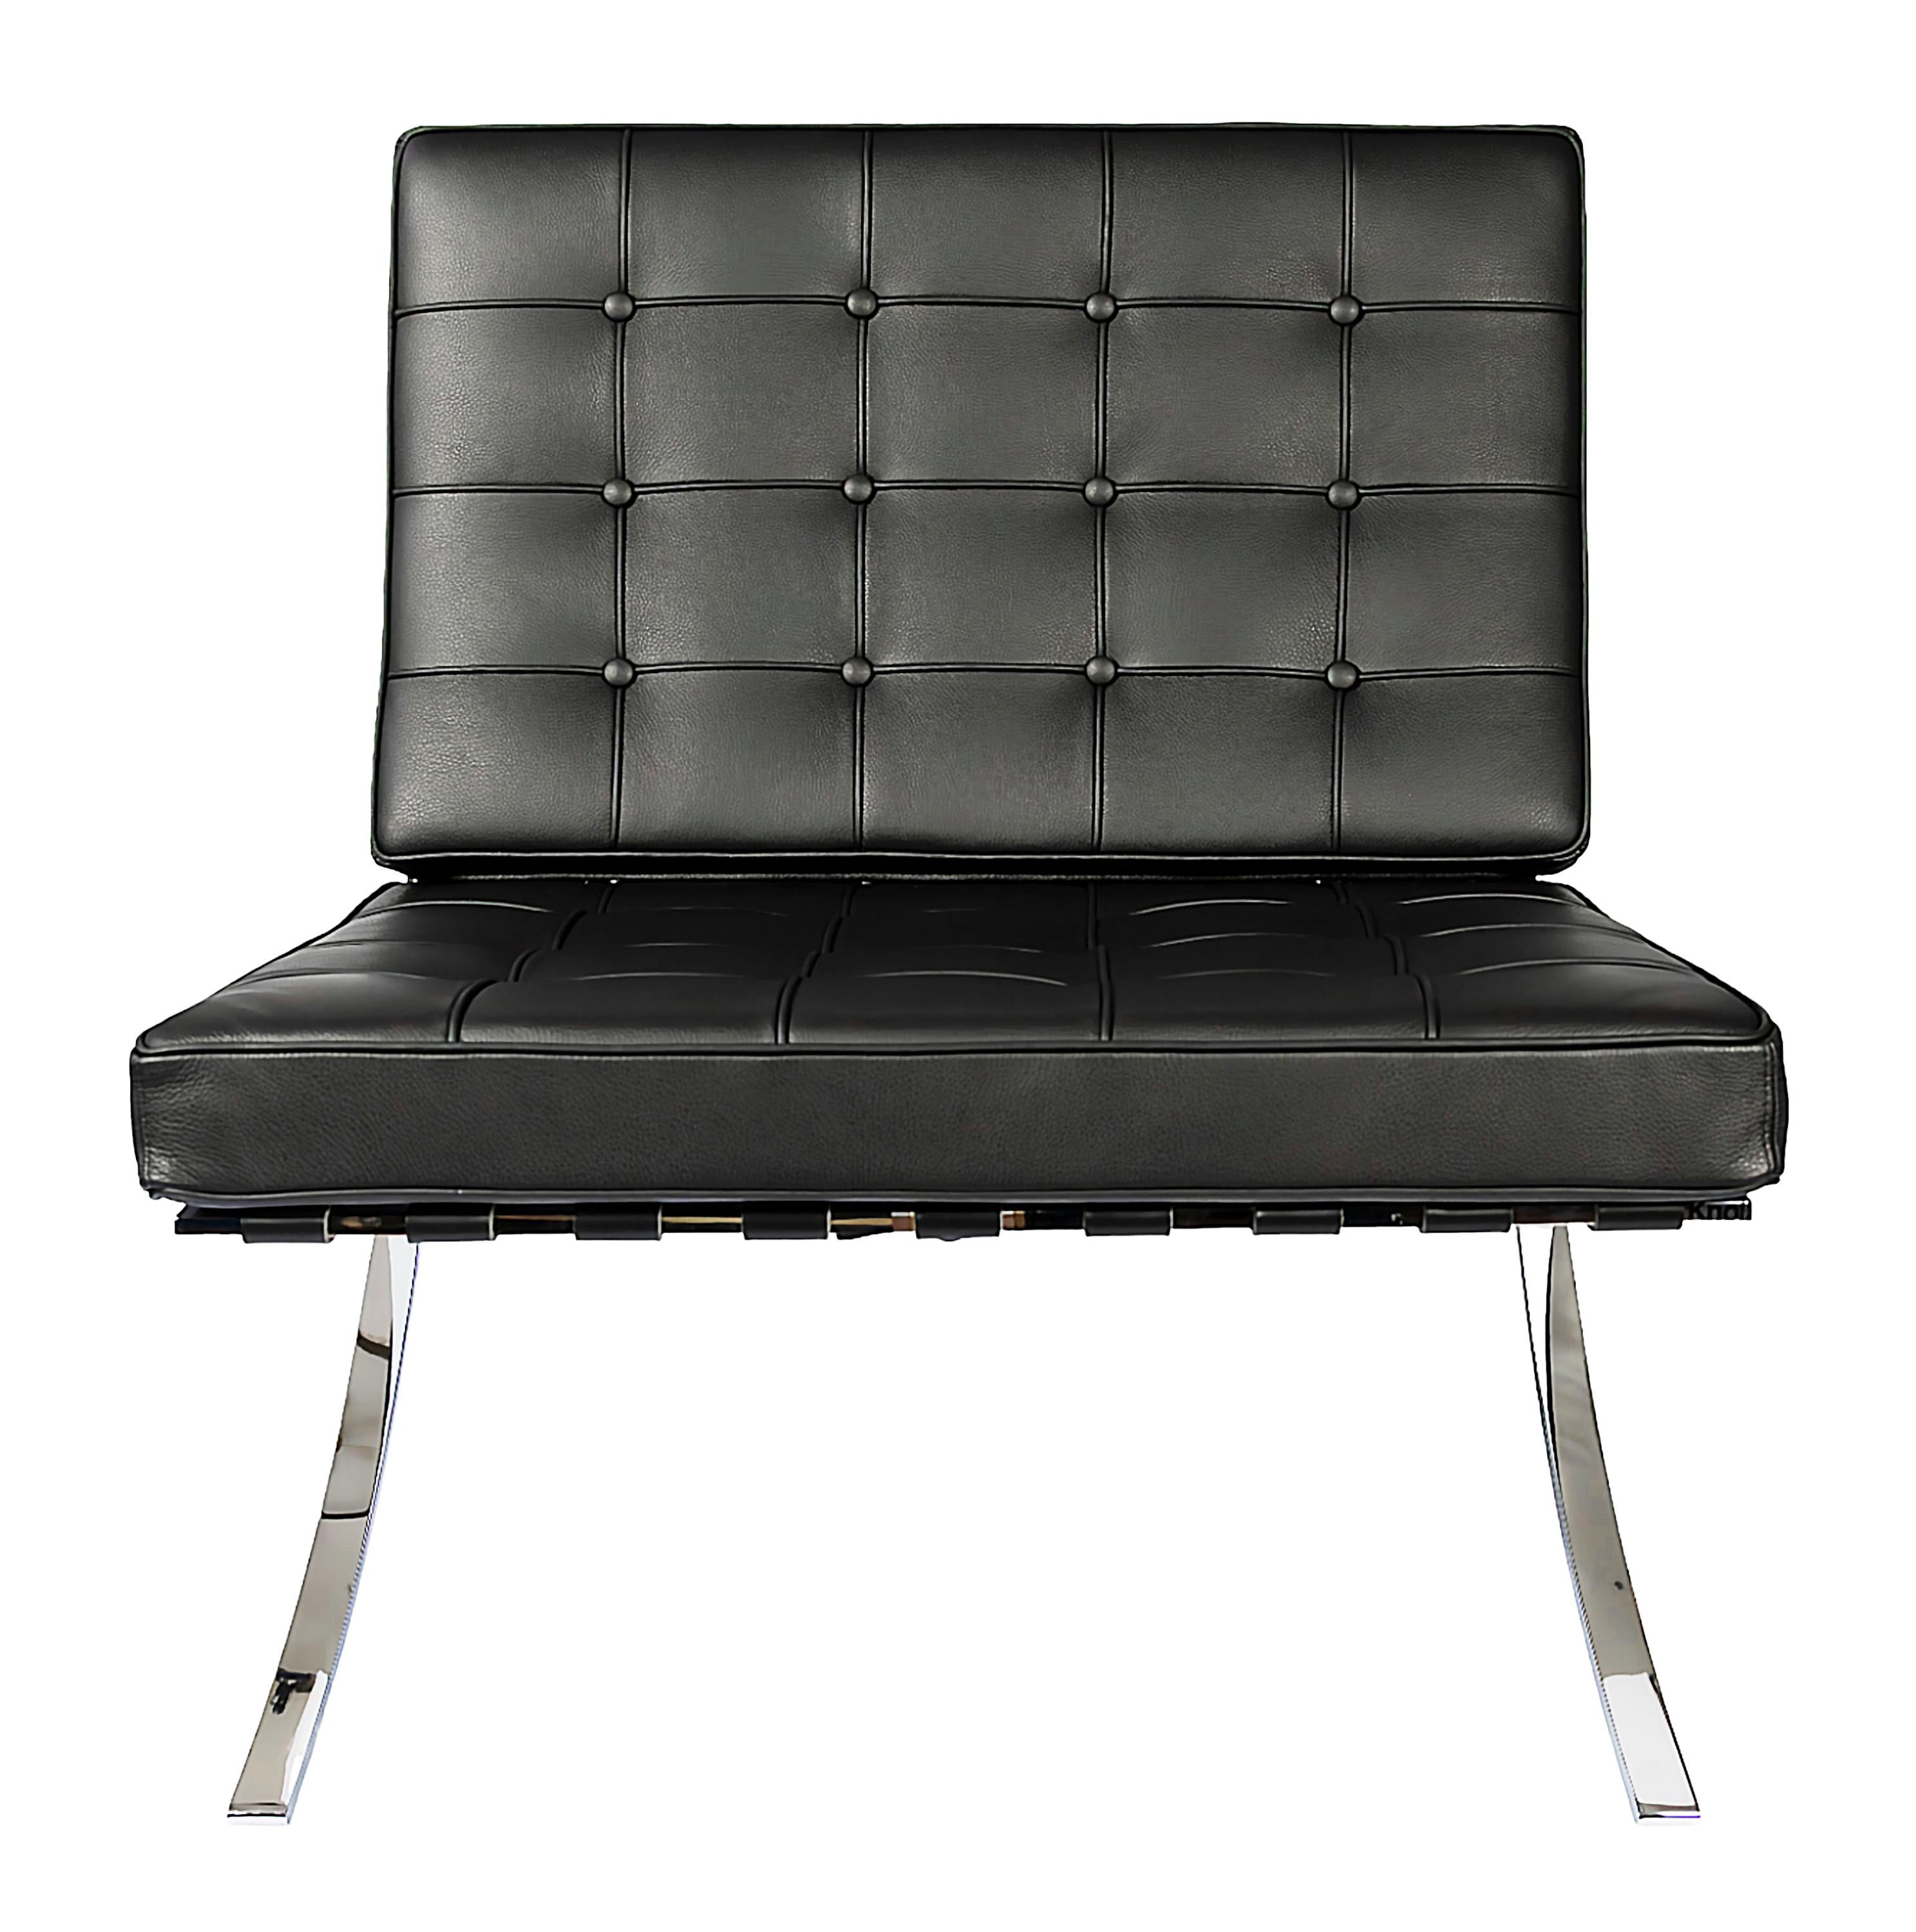 Vintage Barcelona Chair designed by Ludwig Mies van der Rohe in 1920-1949. 
The base is in chrome metal and black leather upholstery.
Labeled on the base: Knoll, Knoll International, Handmade in Italy. 
Very good/excellent vintage condition.

 

 